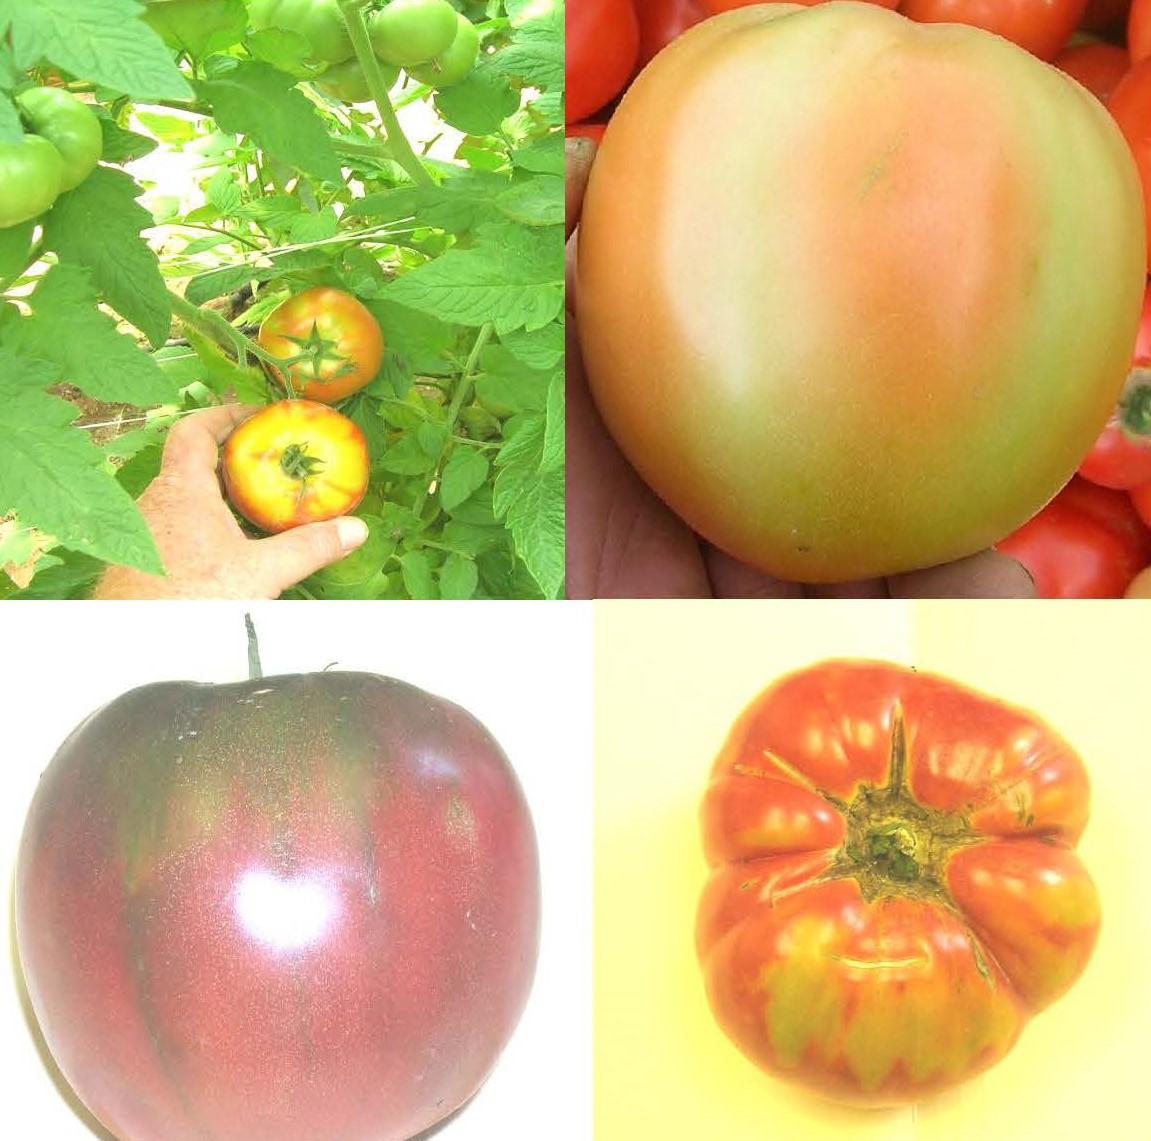 Various forms of ripening problems for tomatoes in the mid-Atlantic